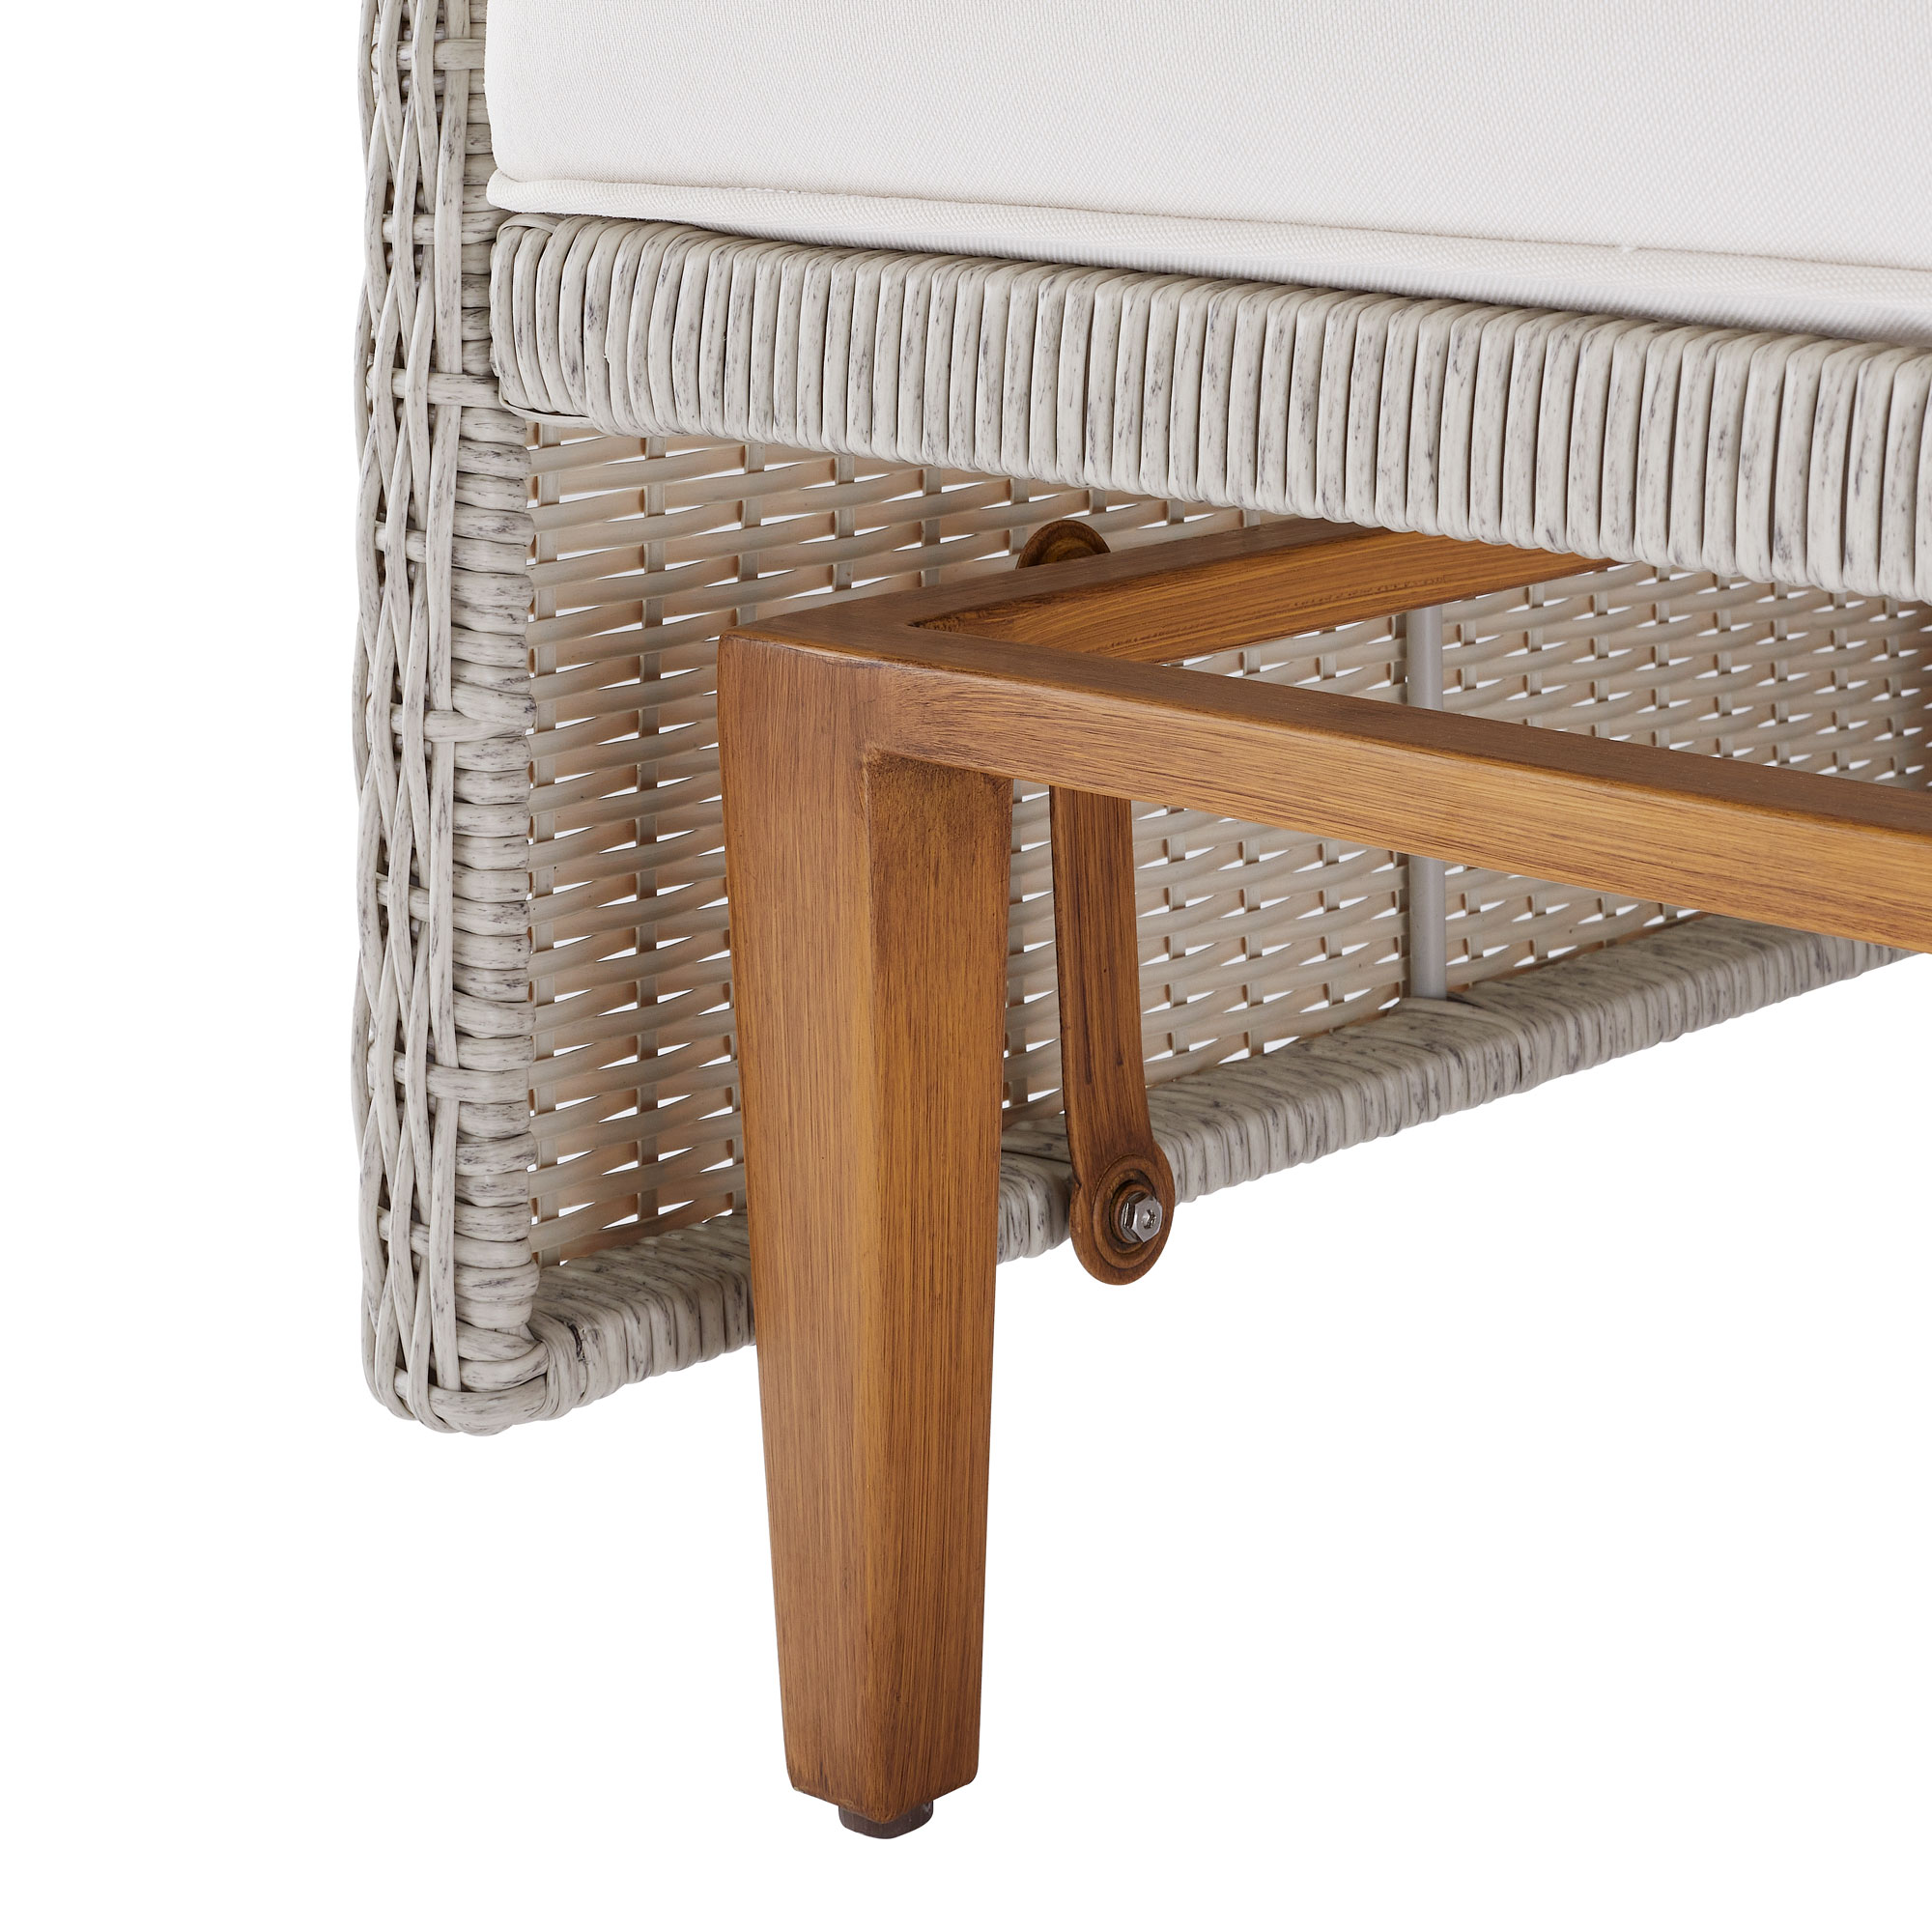 Better Homes & Gardens Davenport Outdoor Loveseat Glider Bench, White and Gray - image 3 of 5